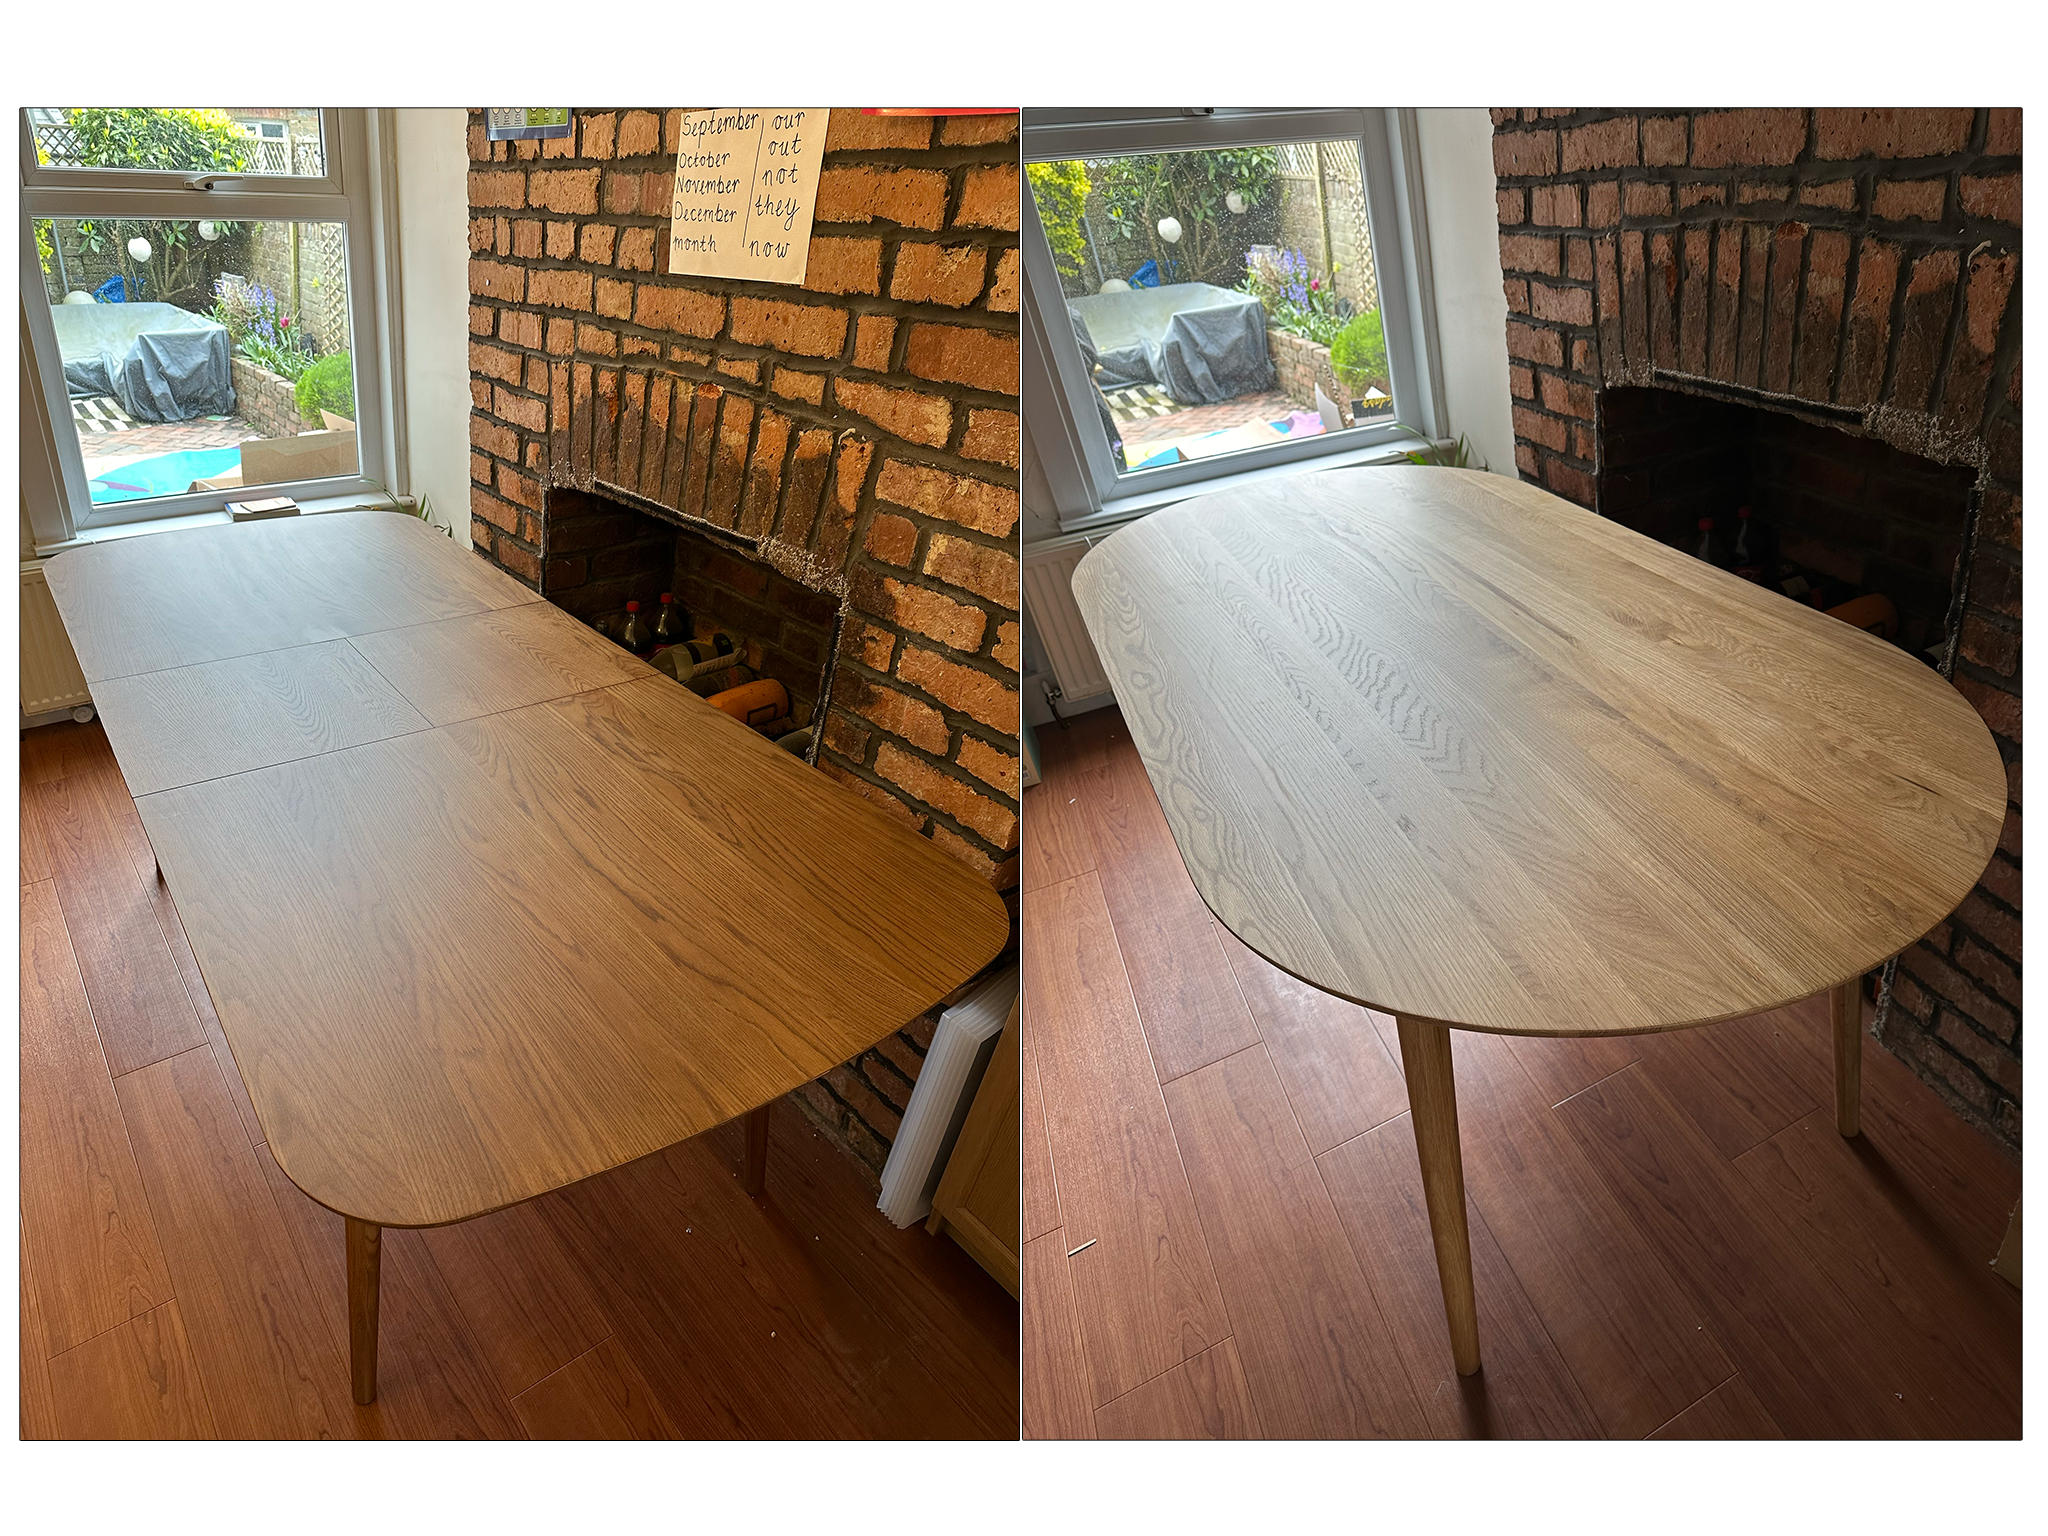 We tested the tables in our busy family home